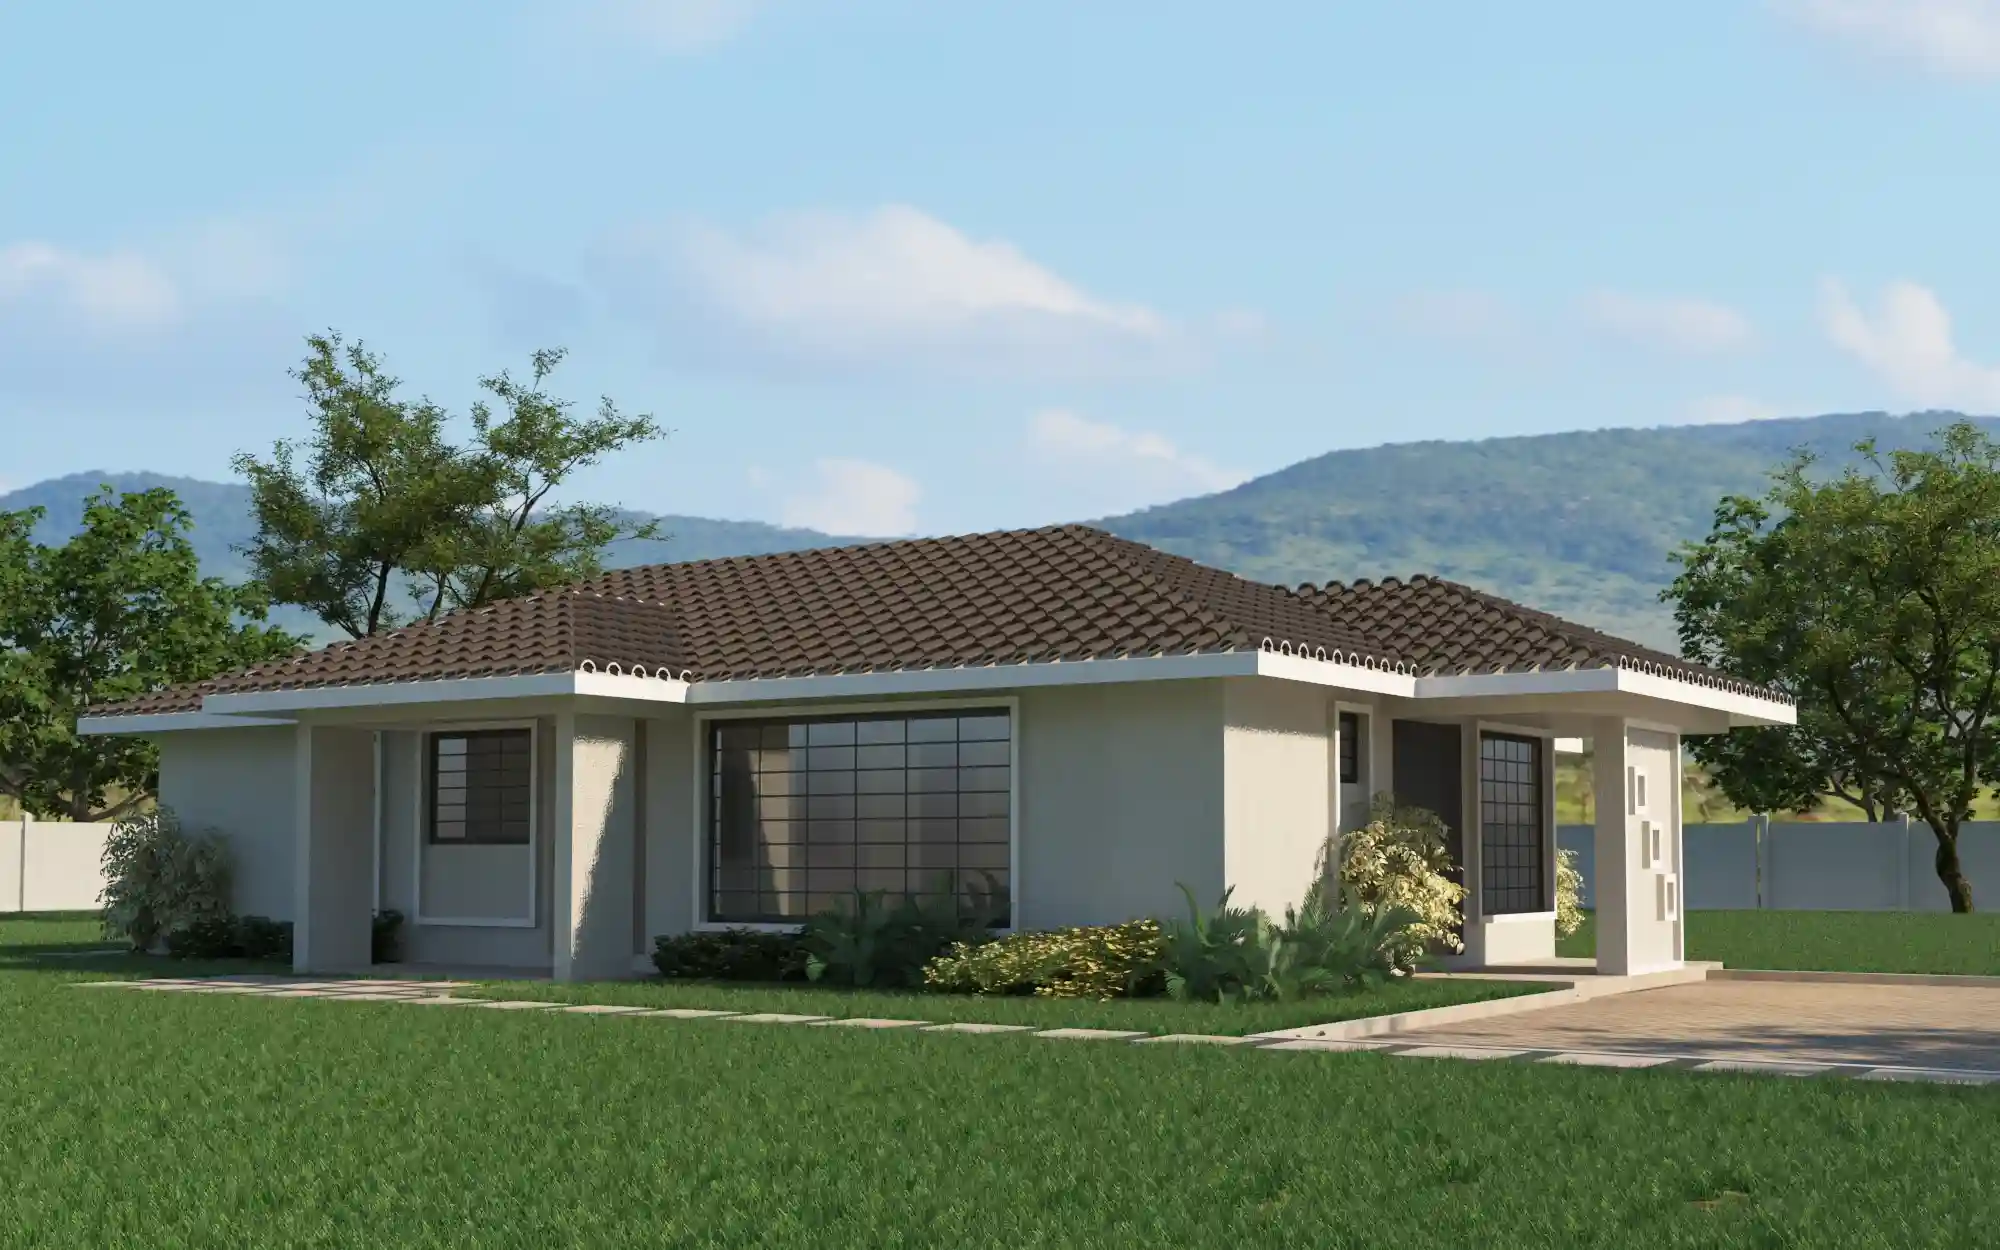 4 Bedroom Bungalow -ID 4152 - 4 BED BNGL TP5.6 OP2 FRONT.jpg from Inuua Tujenge house plans with 4 bedrooms and 2 bathrooms. ( bungalow )